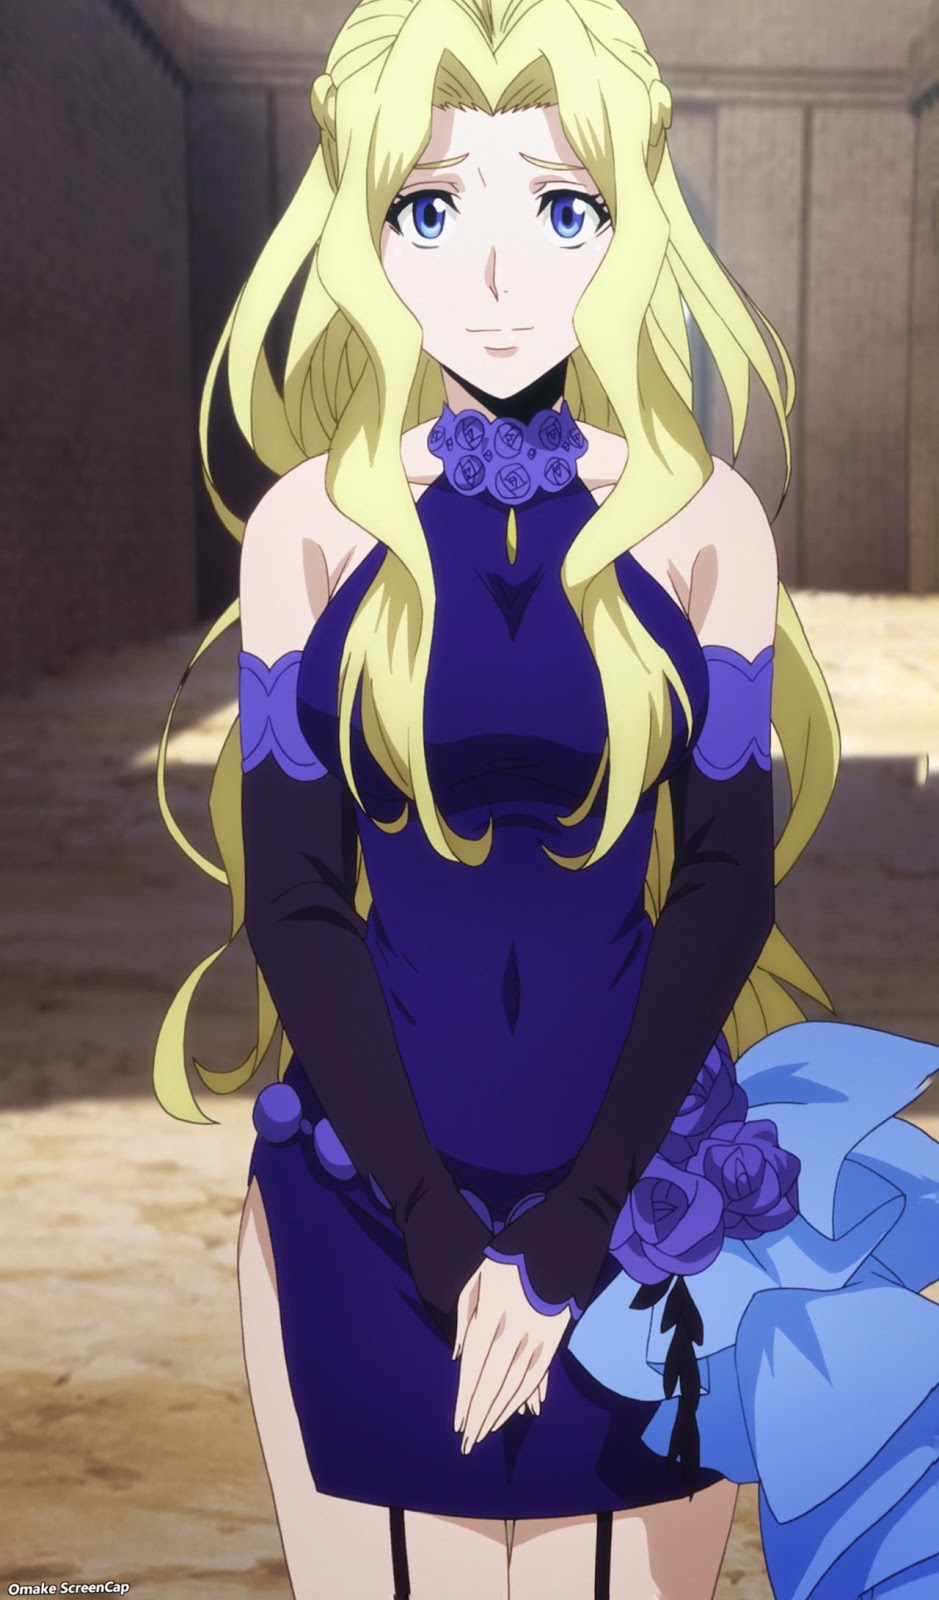 Joeschmo's Gears and Grounds: Omake Gif Anime - Grancrest Senki - Episode 1  - Siluca Reveals Skimpy Outfit